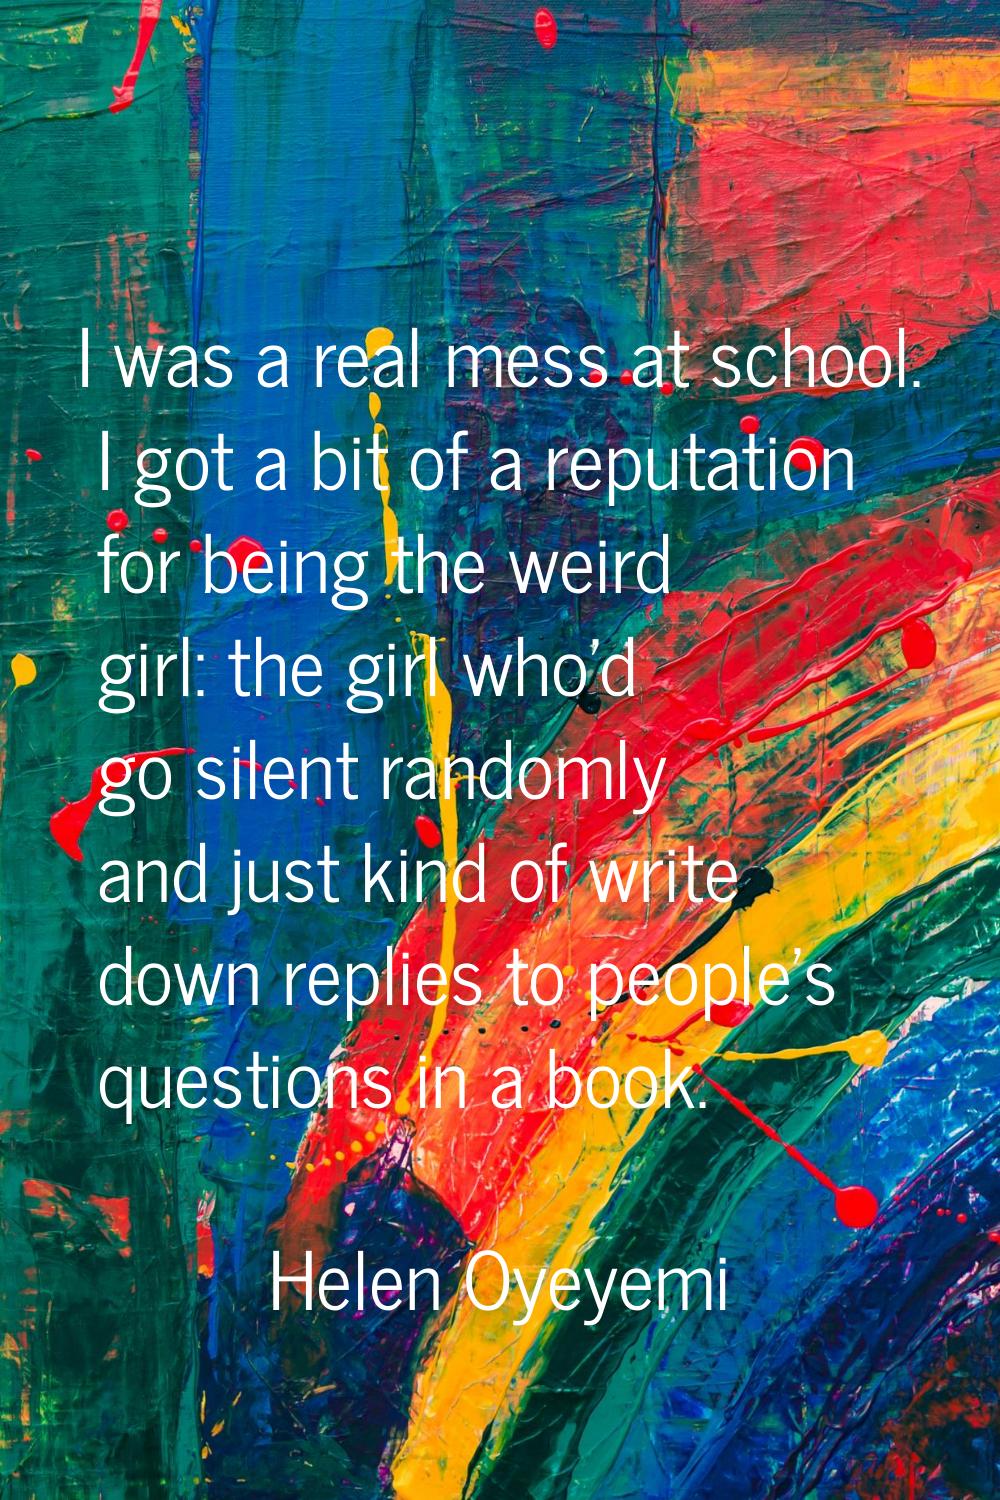 I was a real mess at school. I got a bit of a reputation for being the weird girl: the girl who'd g